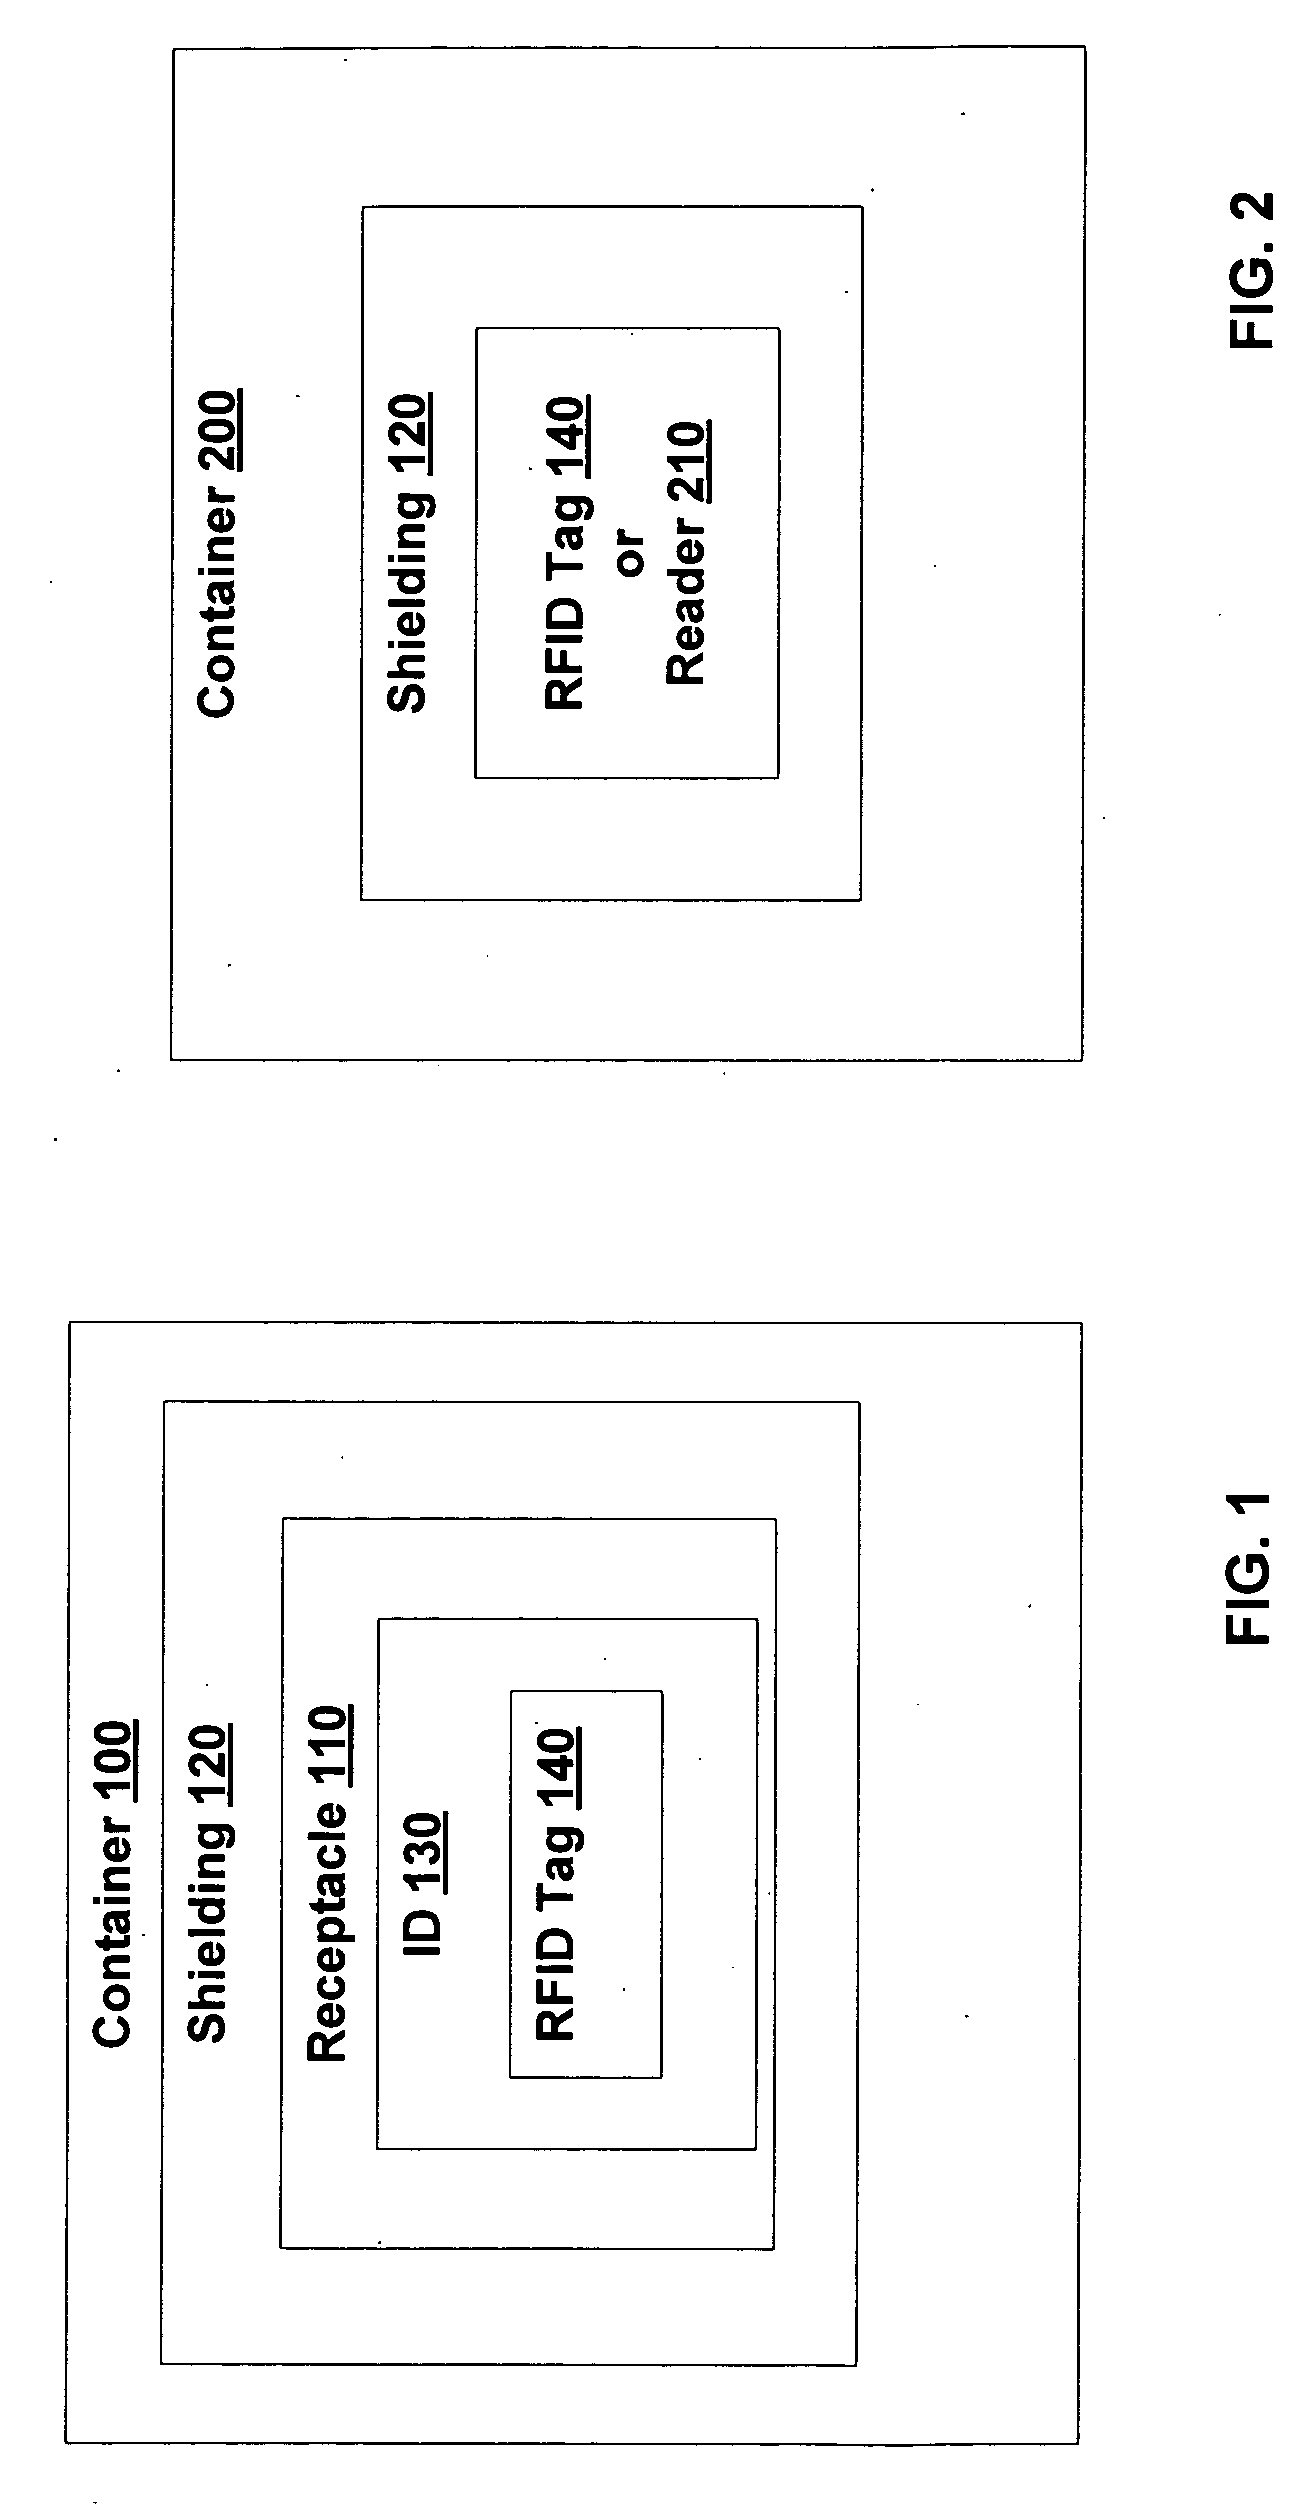 Identity devices including radio frequency shielding